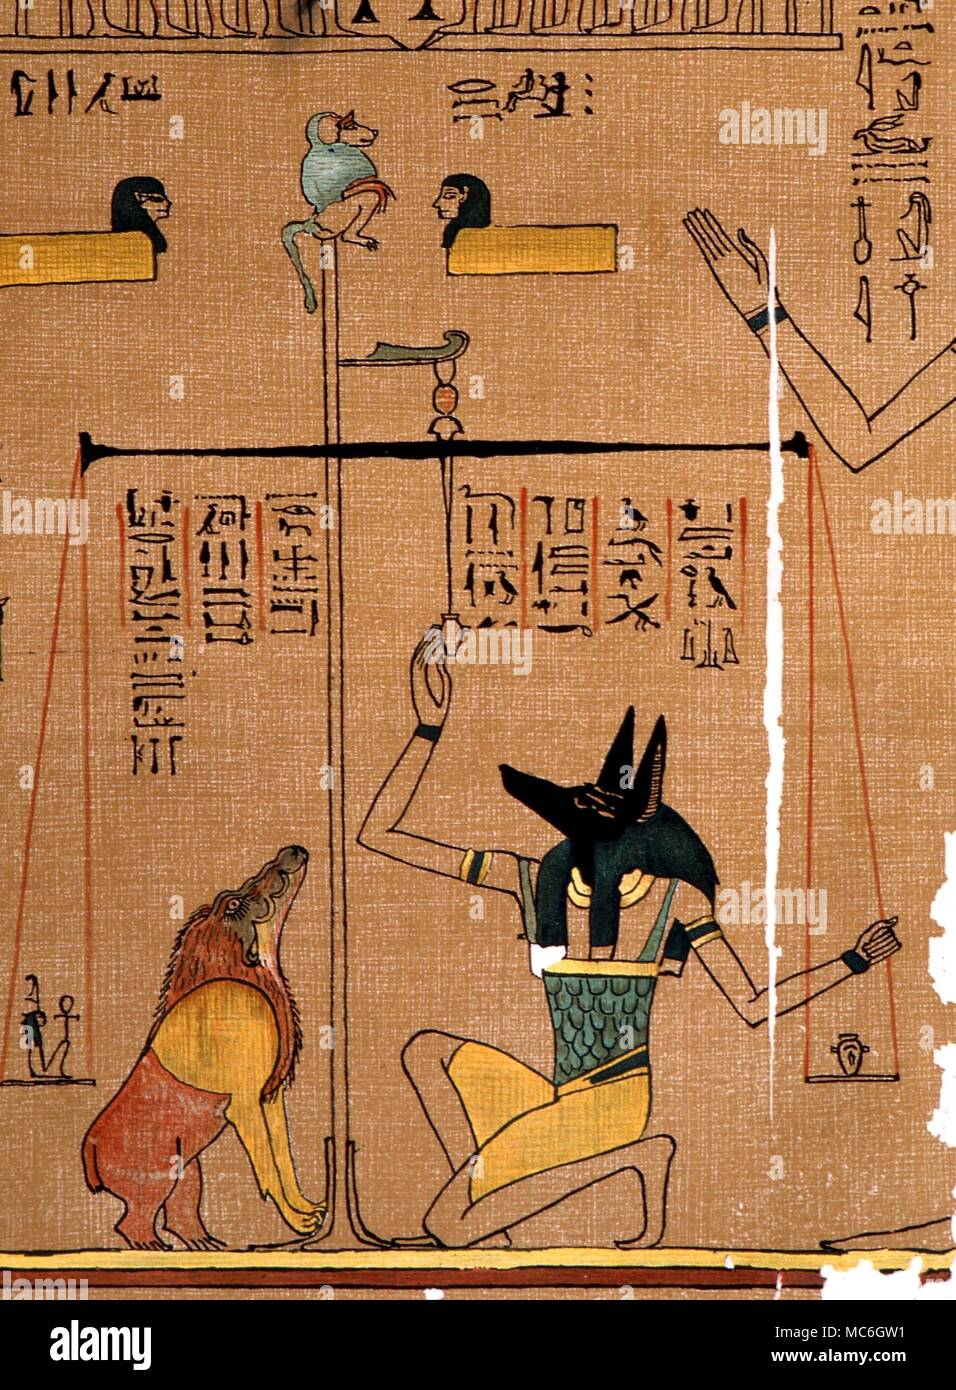 EGYPTIAN MYTHOLOGY - Deatil from The Egyptian Book of the Dead, with jackal-headed Anubis weighing the heart of the newly departed, watched over by Amemit. The baboon finial is almost certainly a symbol of Time Stock Photo